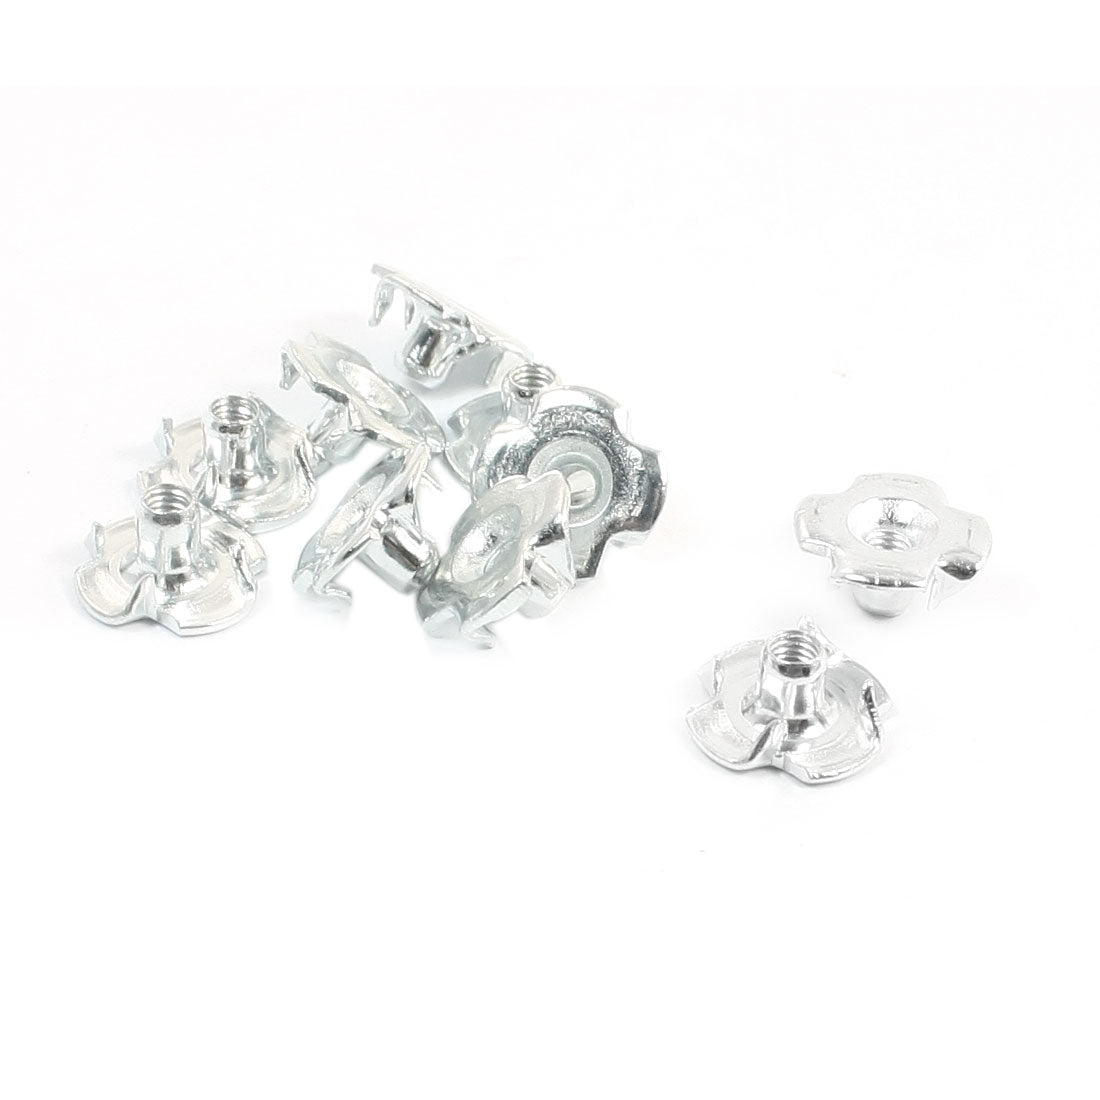 uxcell Uxcell 10Pcs Silver Tone T Nuts 4-Claw Nut for 3mm Diameter Screw